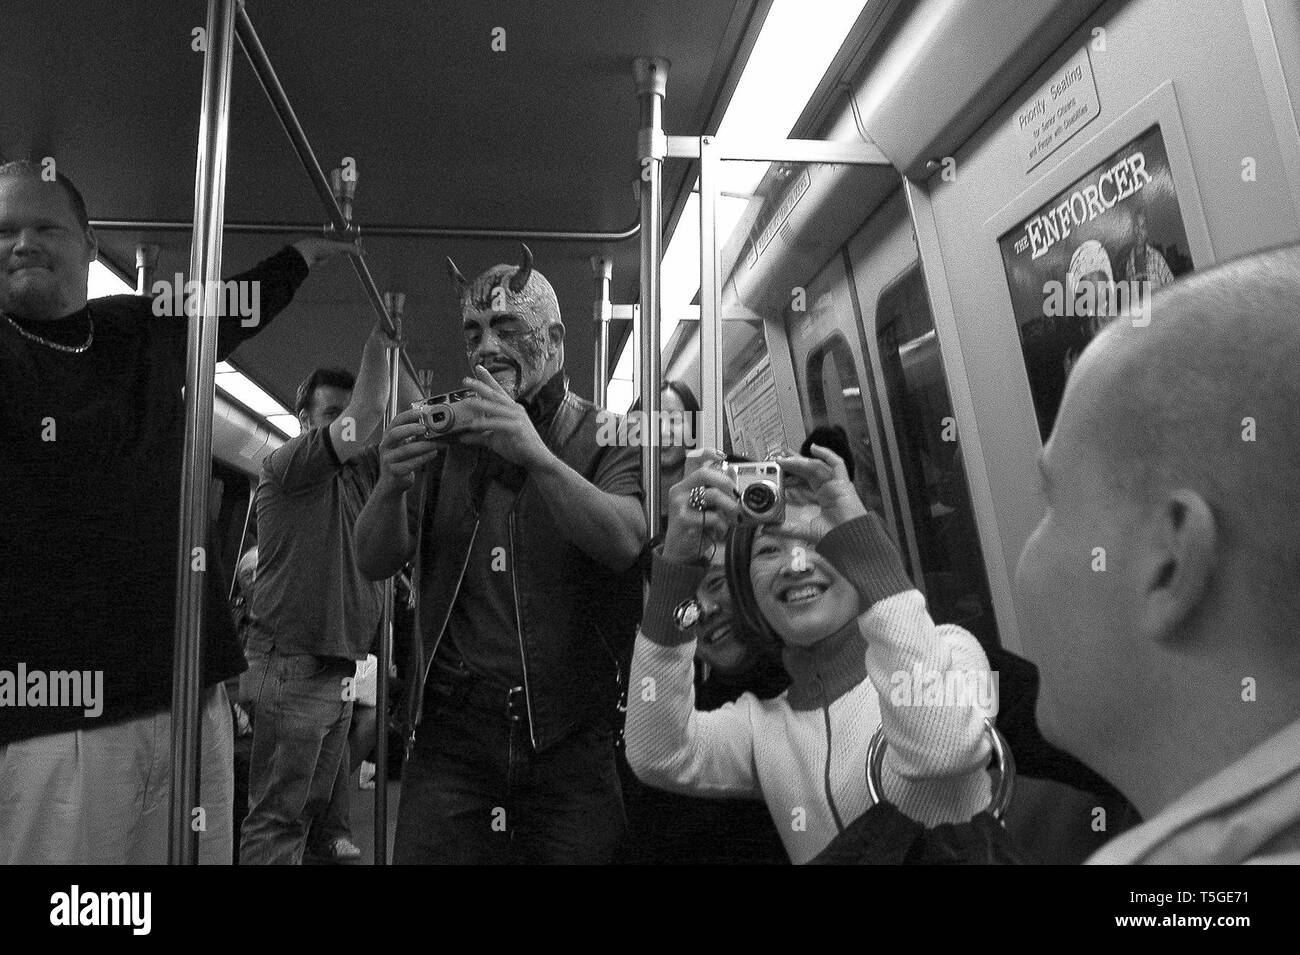 Washington, DC, USA. 31st Oct, 2003. People take photos of other people wearing costumes for Halloween on the Metro in Washington, DC, October 31, 2003. Credit: Bill Putnam/ZUMA Wire/Alamy Live News Stock Photo